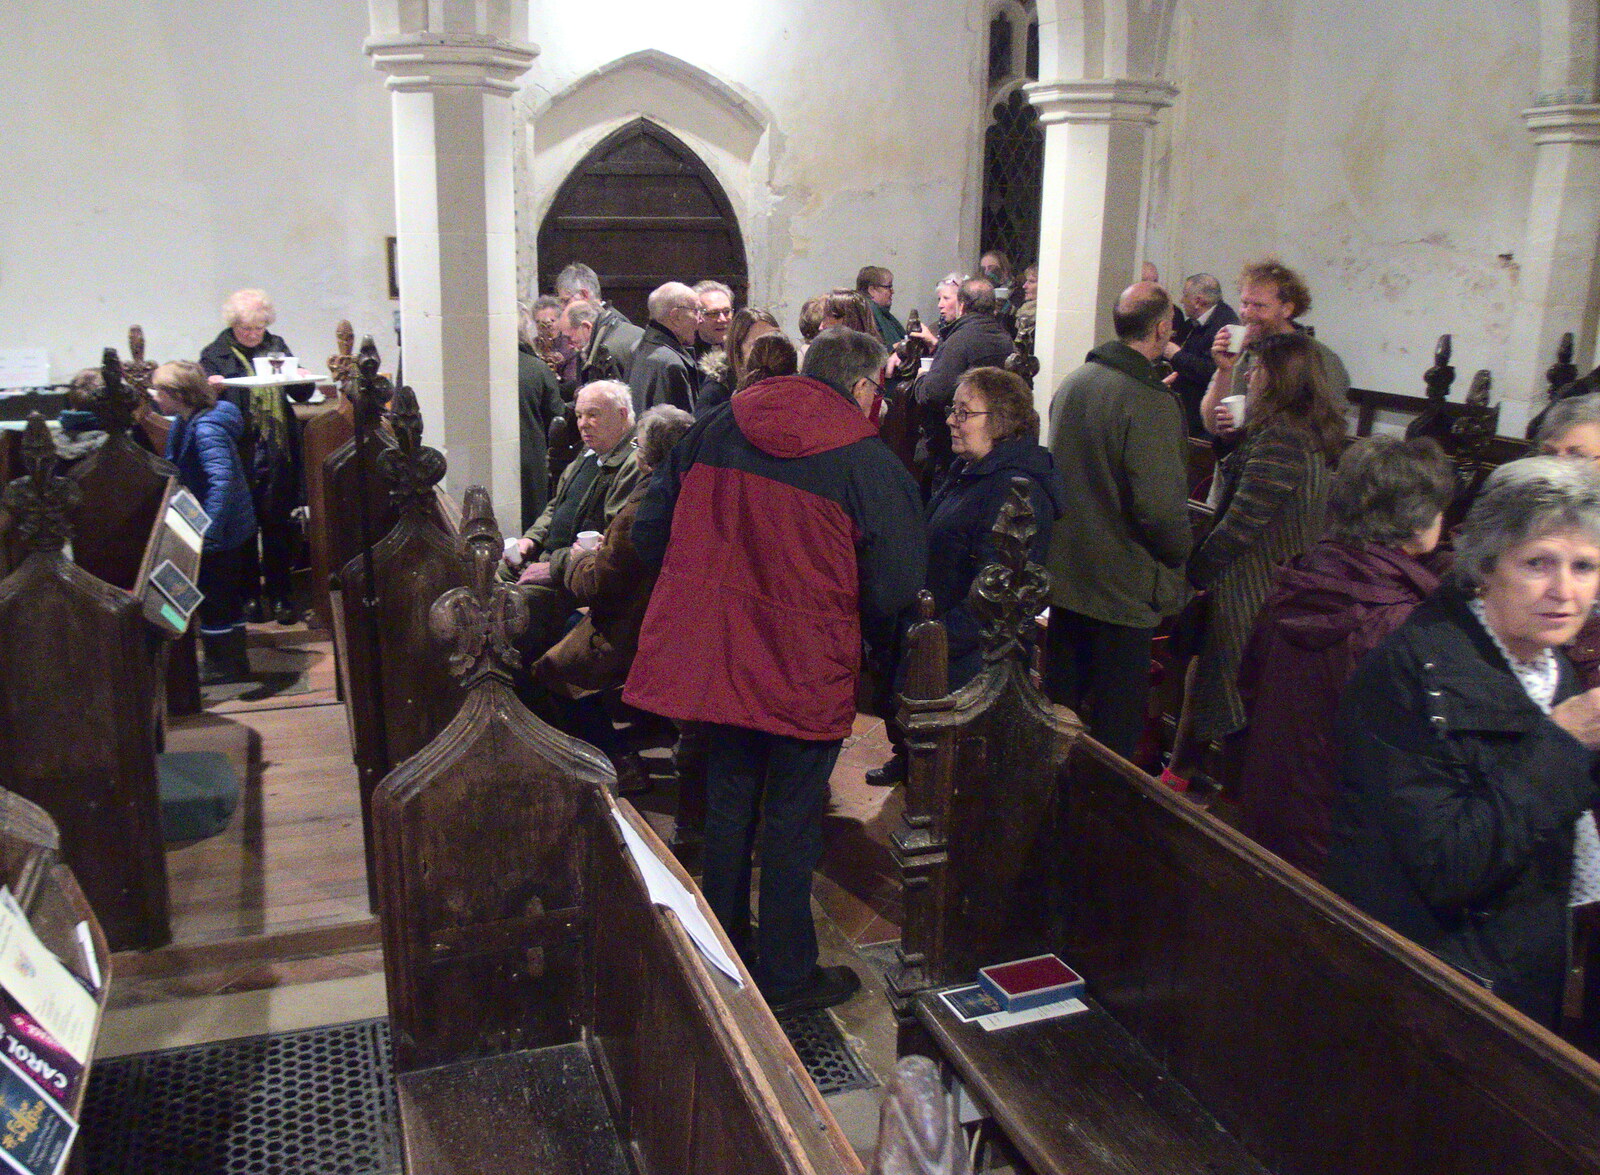 There's a record turn-out this year from Christmas Carols at St. Margaret's, Thrandeston, Suffolk - 17th December 2018